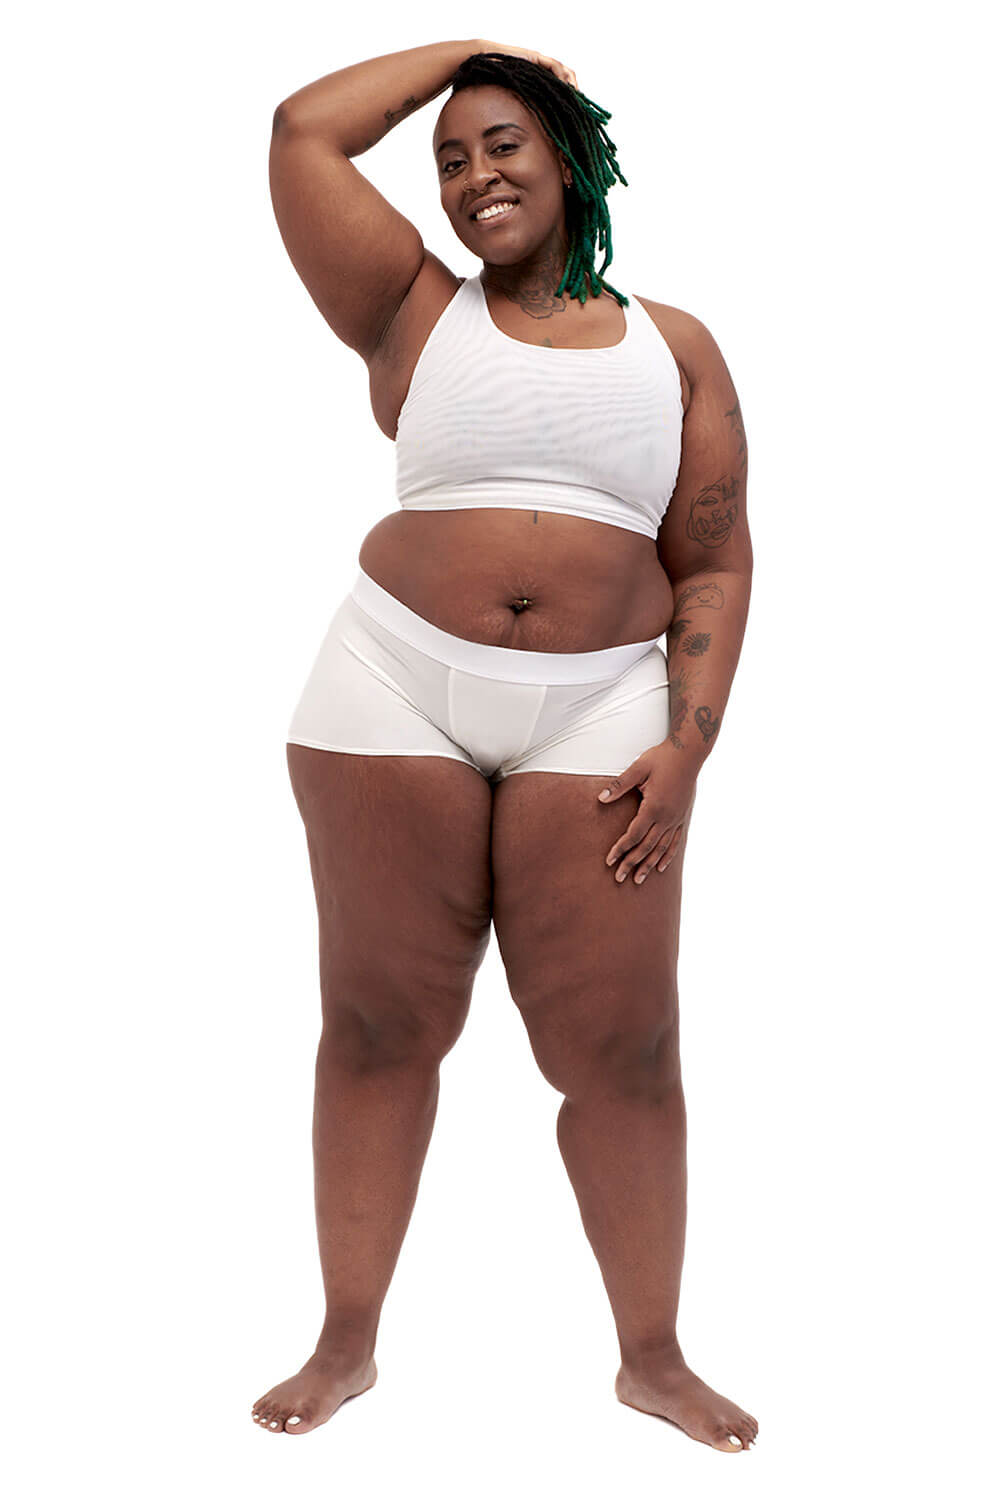 Plus-sized person wearing a white racerback chest binder made from breathable mesh, photographed from the front.